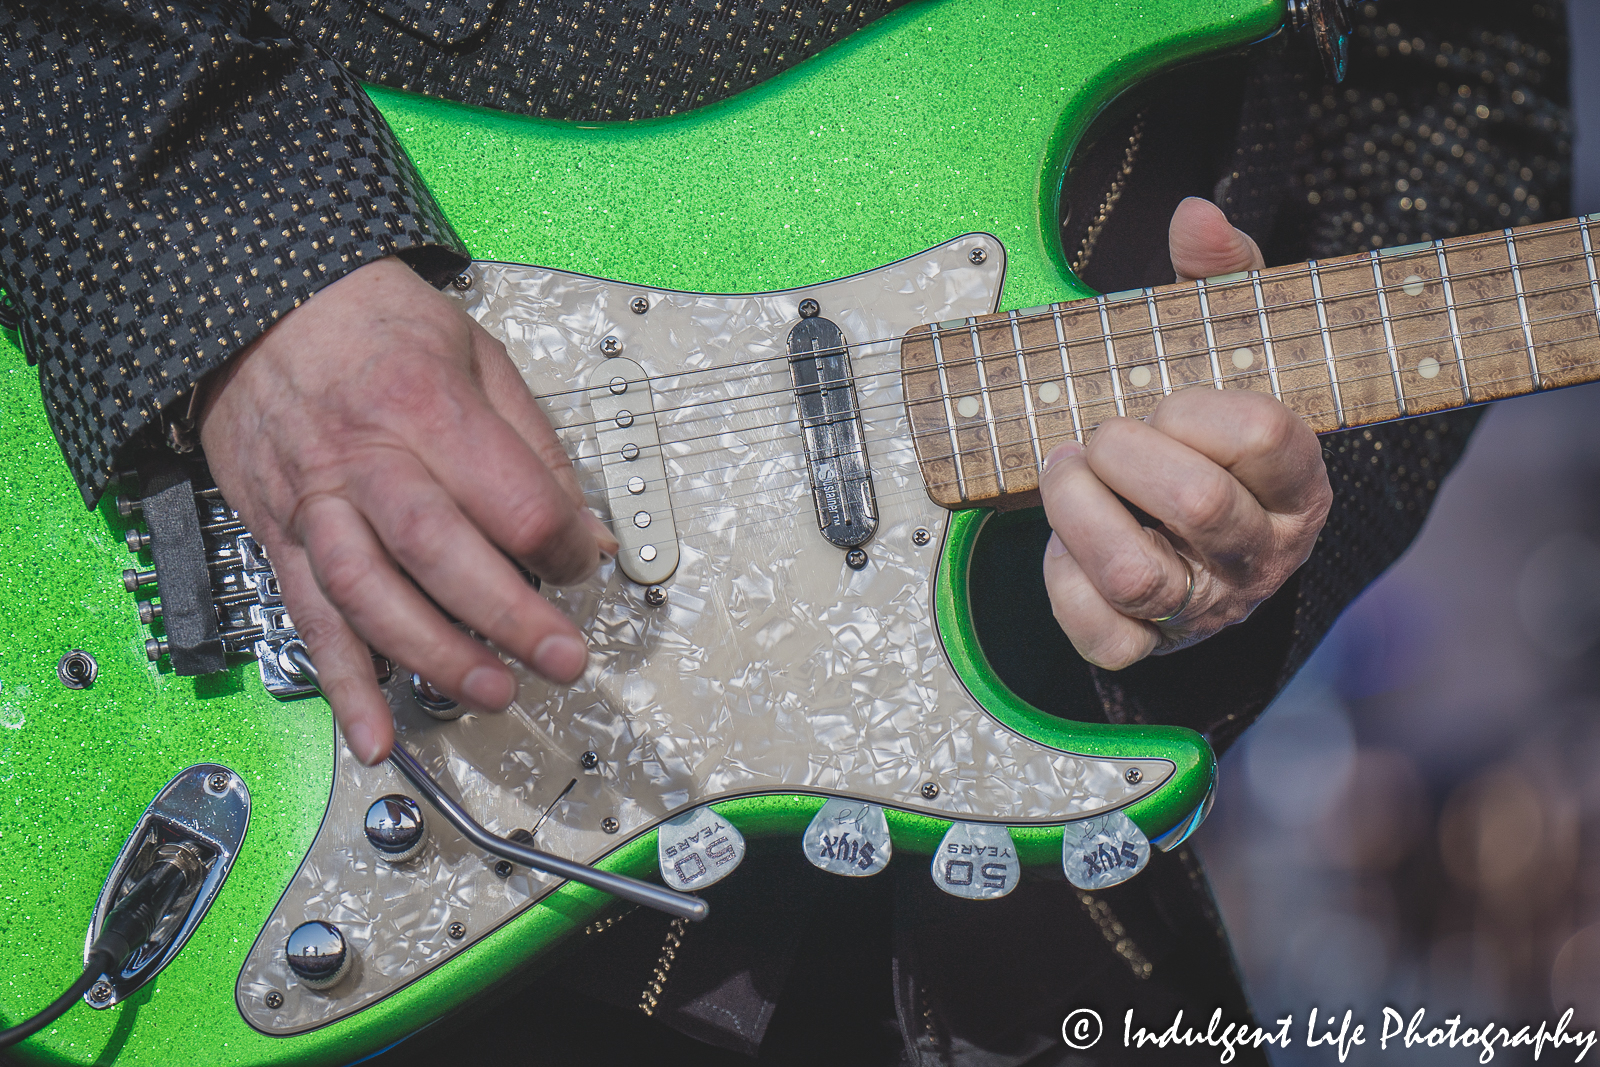 Guitar of Styx band member James "J.Y." Young as he performs live at Starlight Theatre in Kansas City, MO on Ju e 14, 2022.